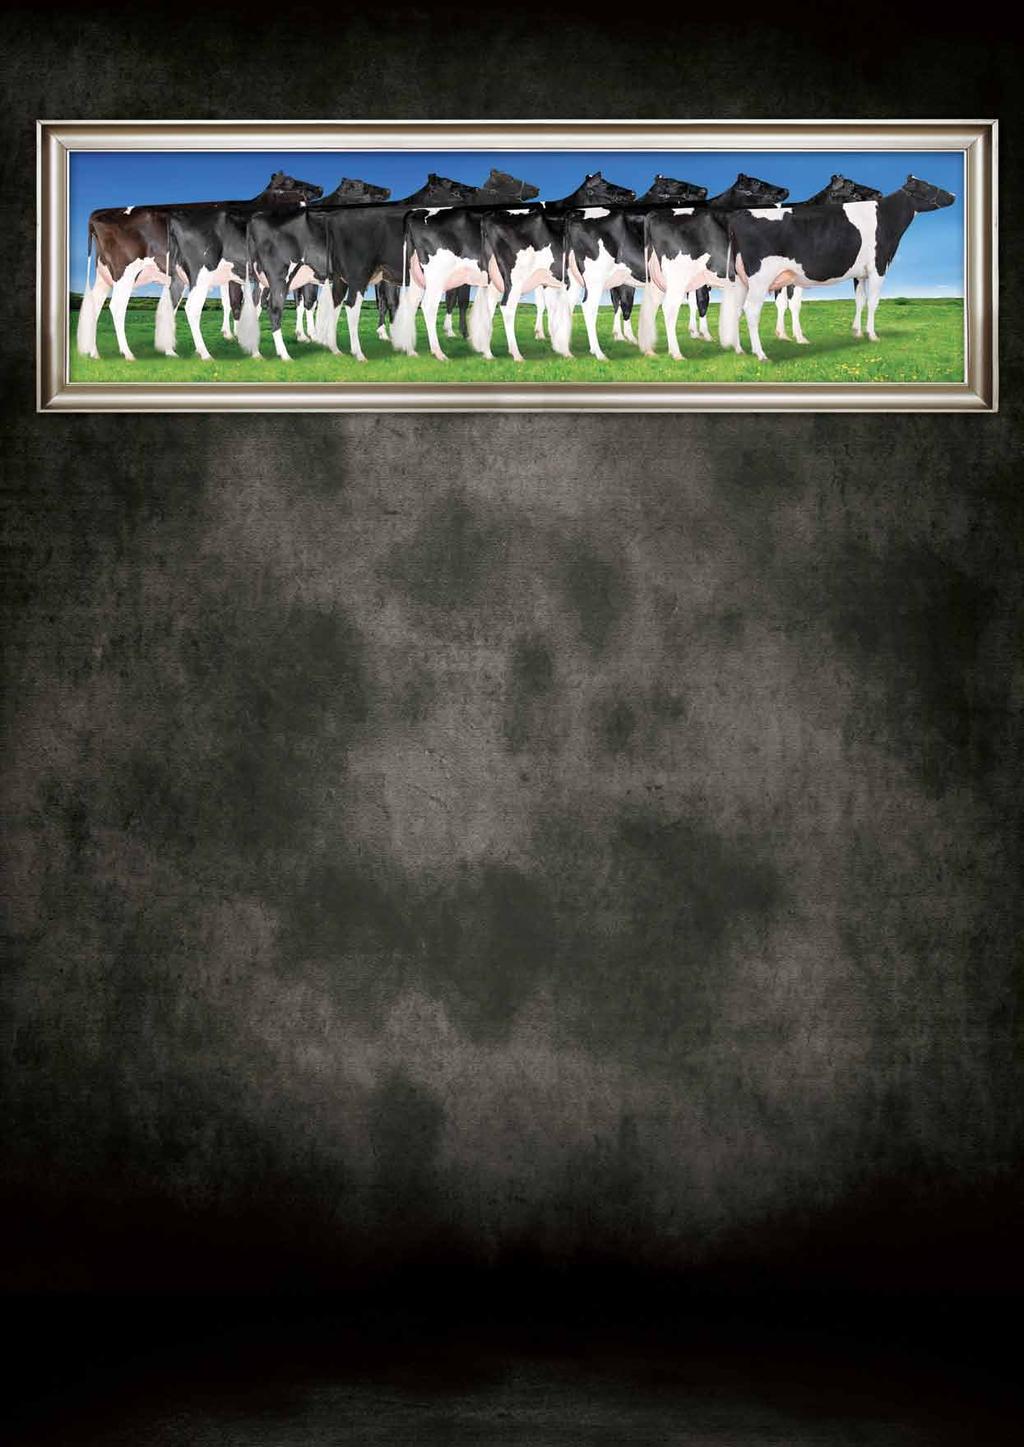 Your Source for Goldwyn Sons Page 3 SEMEX: Your Source For Goldwyn Sons Page 4-5 MODERN BALANCED BREEDING: Beyond The Typ(e)ical Page 6-7 A New Look At: Herd Life Page 8-9 INCREASE PROFITS: Reduce